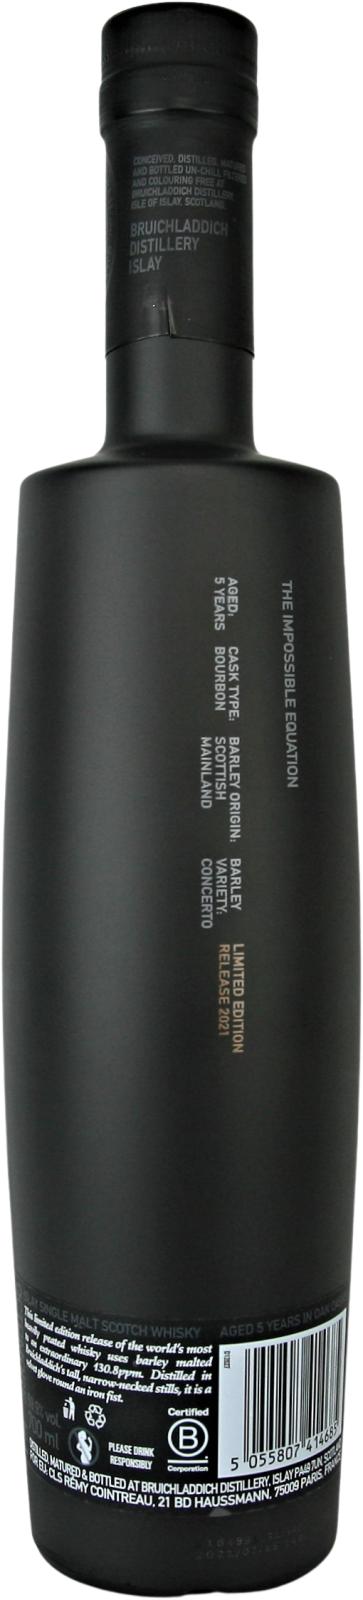 Octomore Edition 12.1 The Impossible Equation / 130.8 PPM